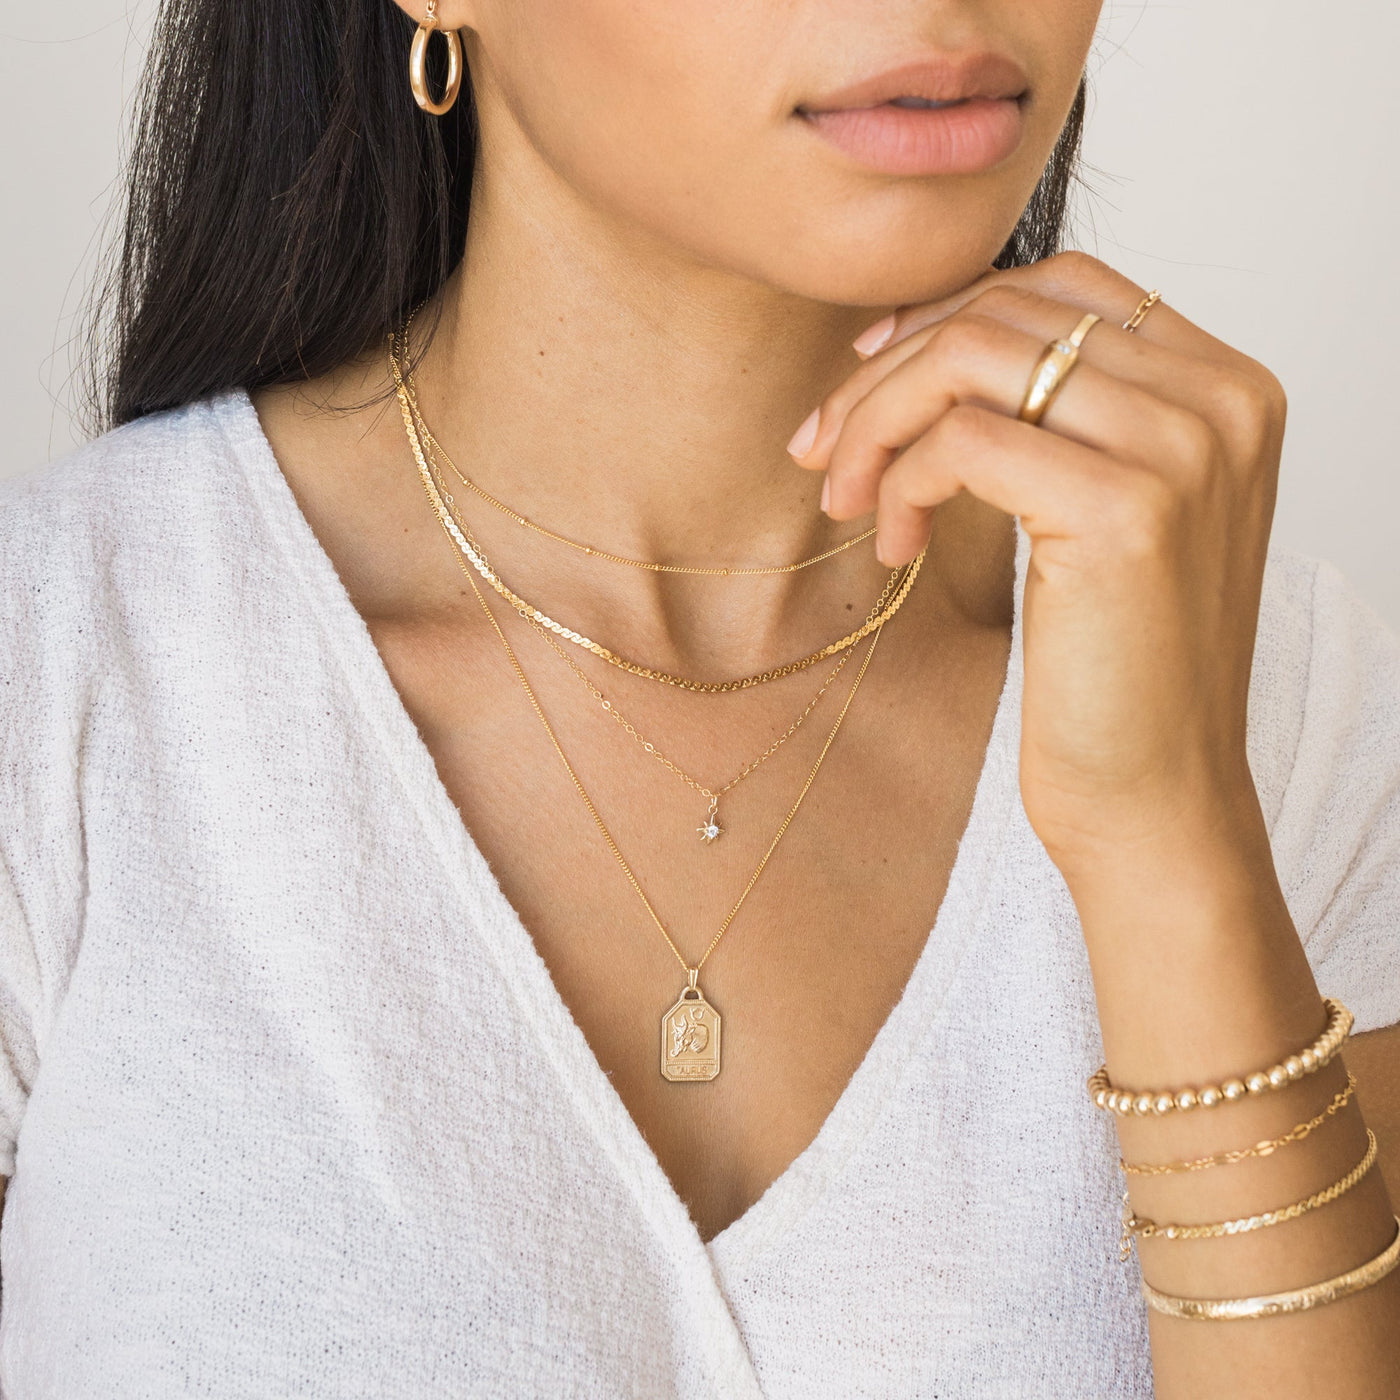 Serpentine Necklace | Simple & Dainty Jewelry